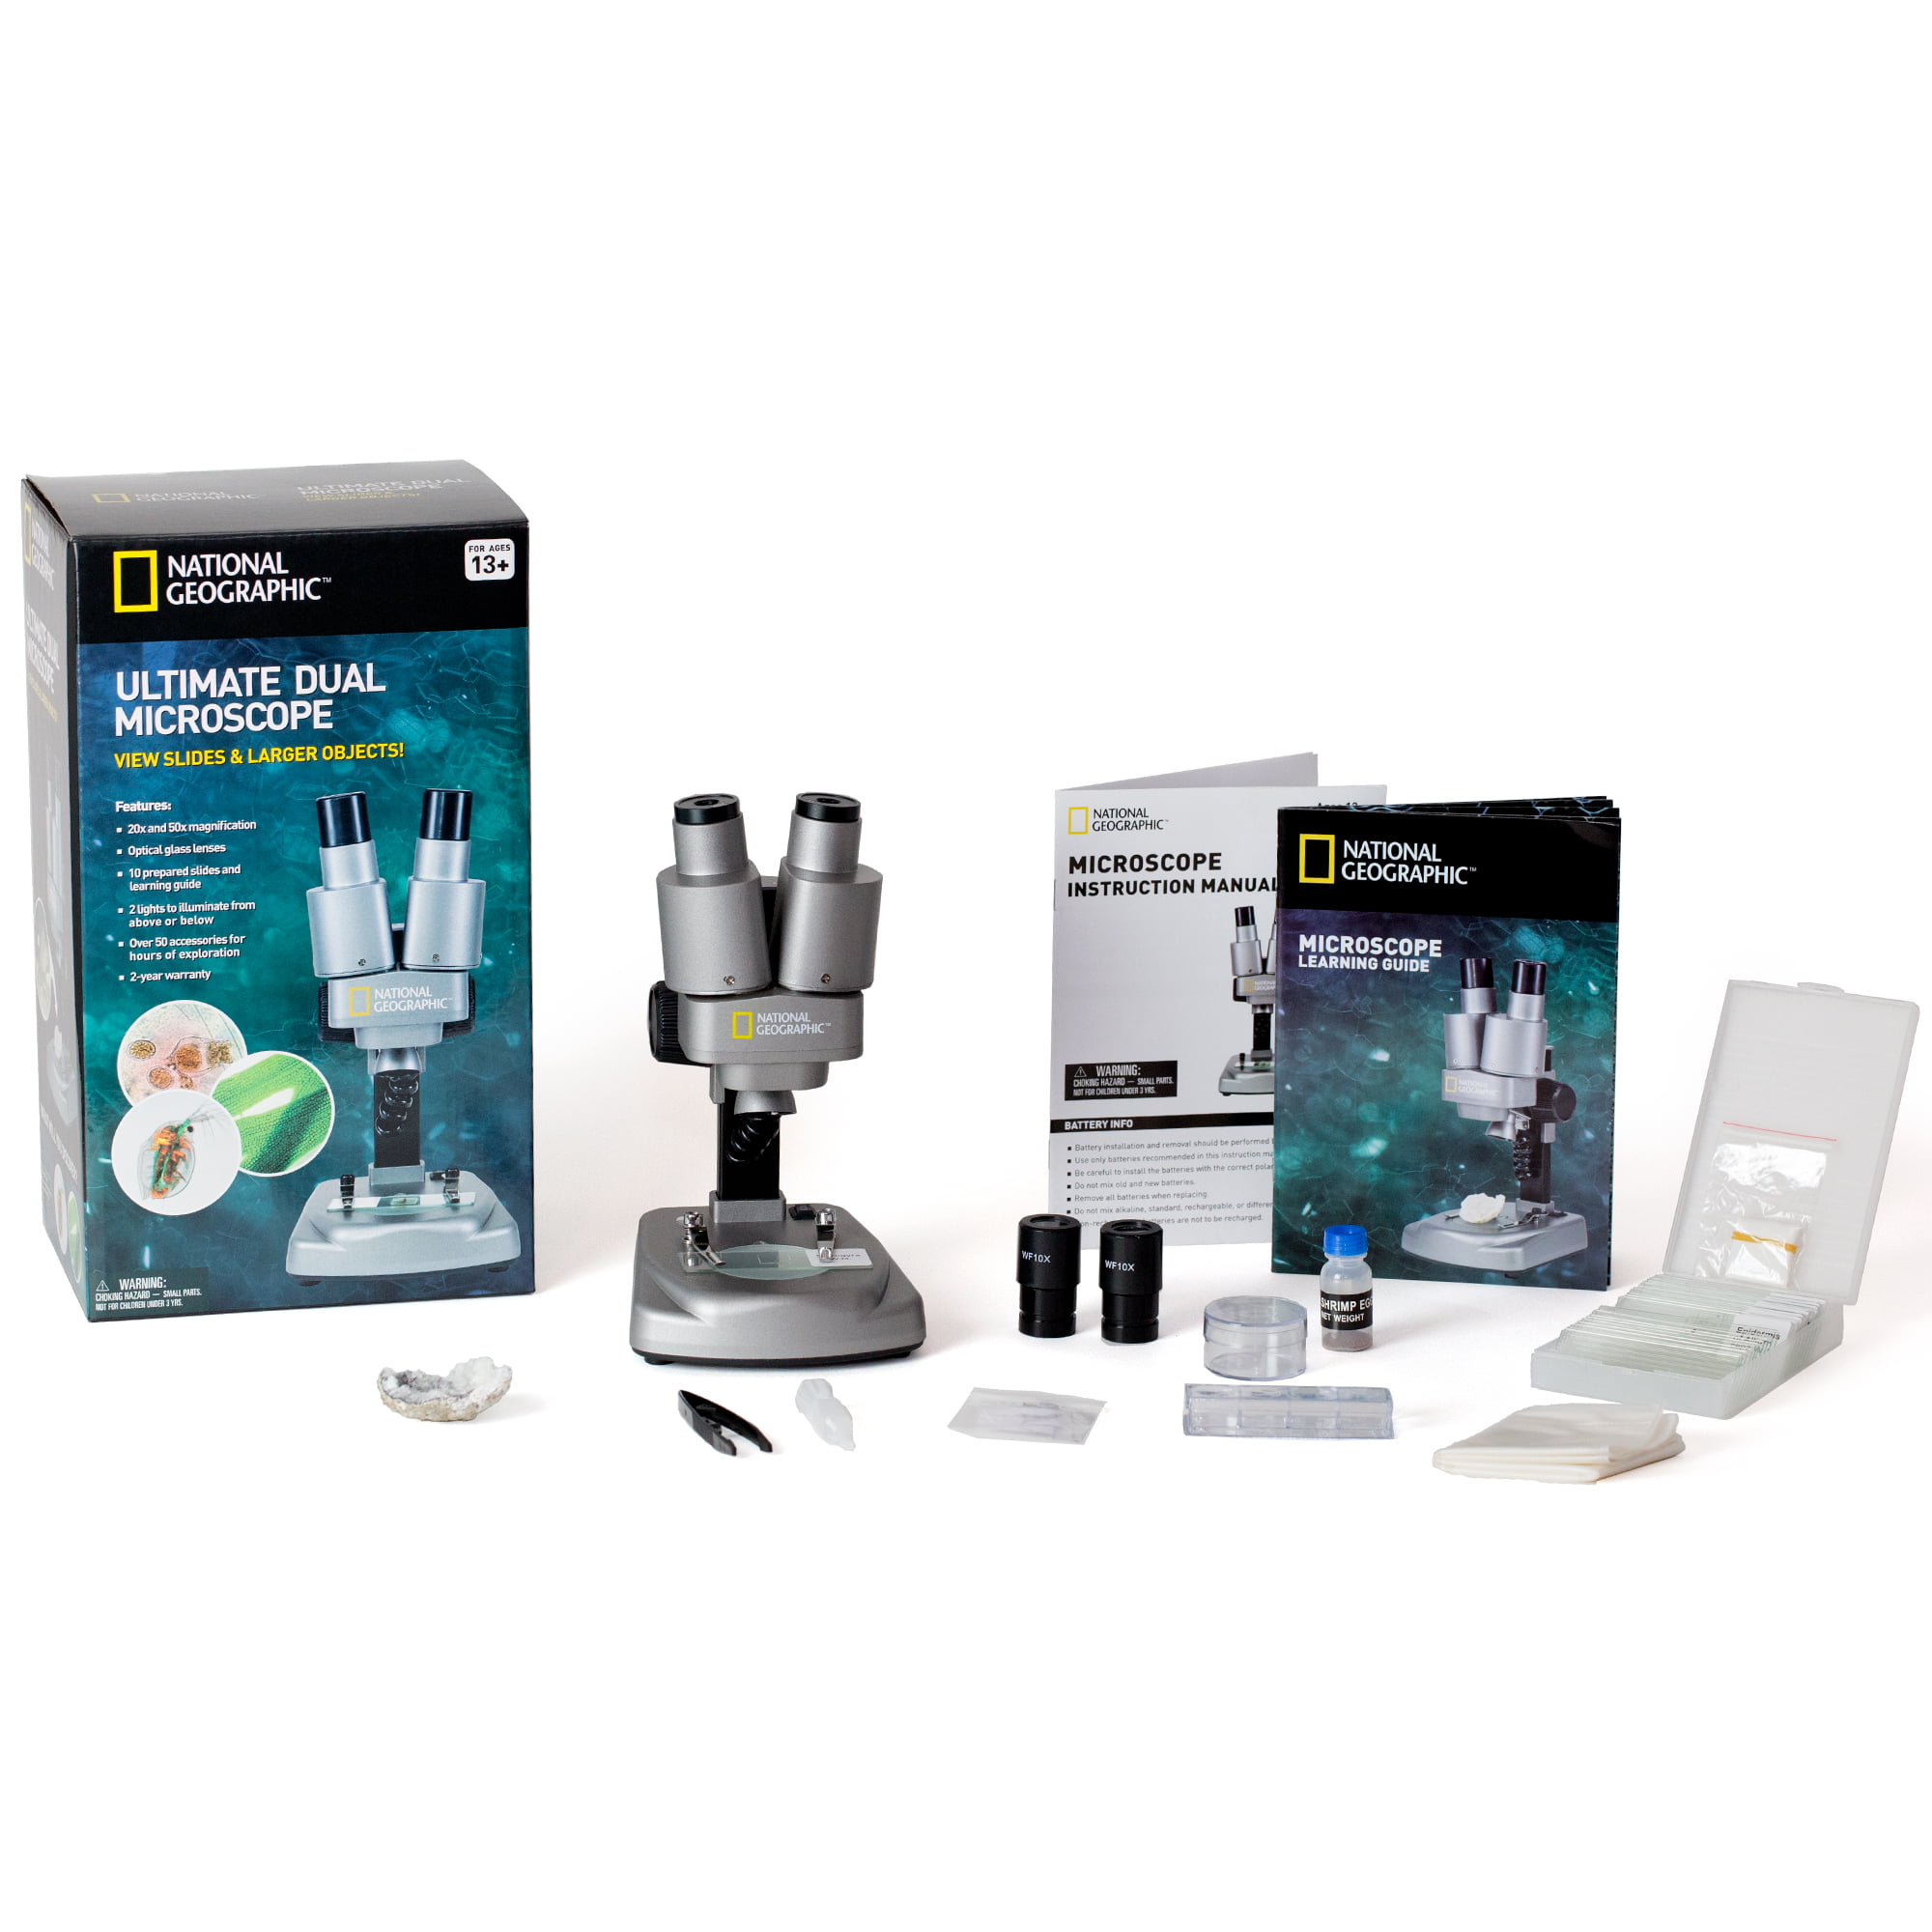 Microscope by National Geographic - Dual Purpose Illumination and